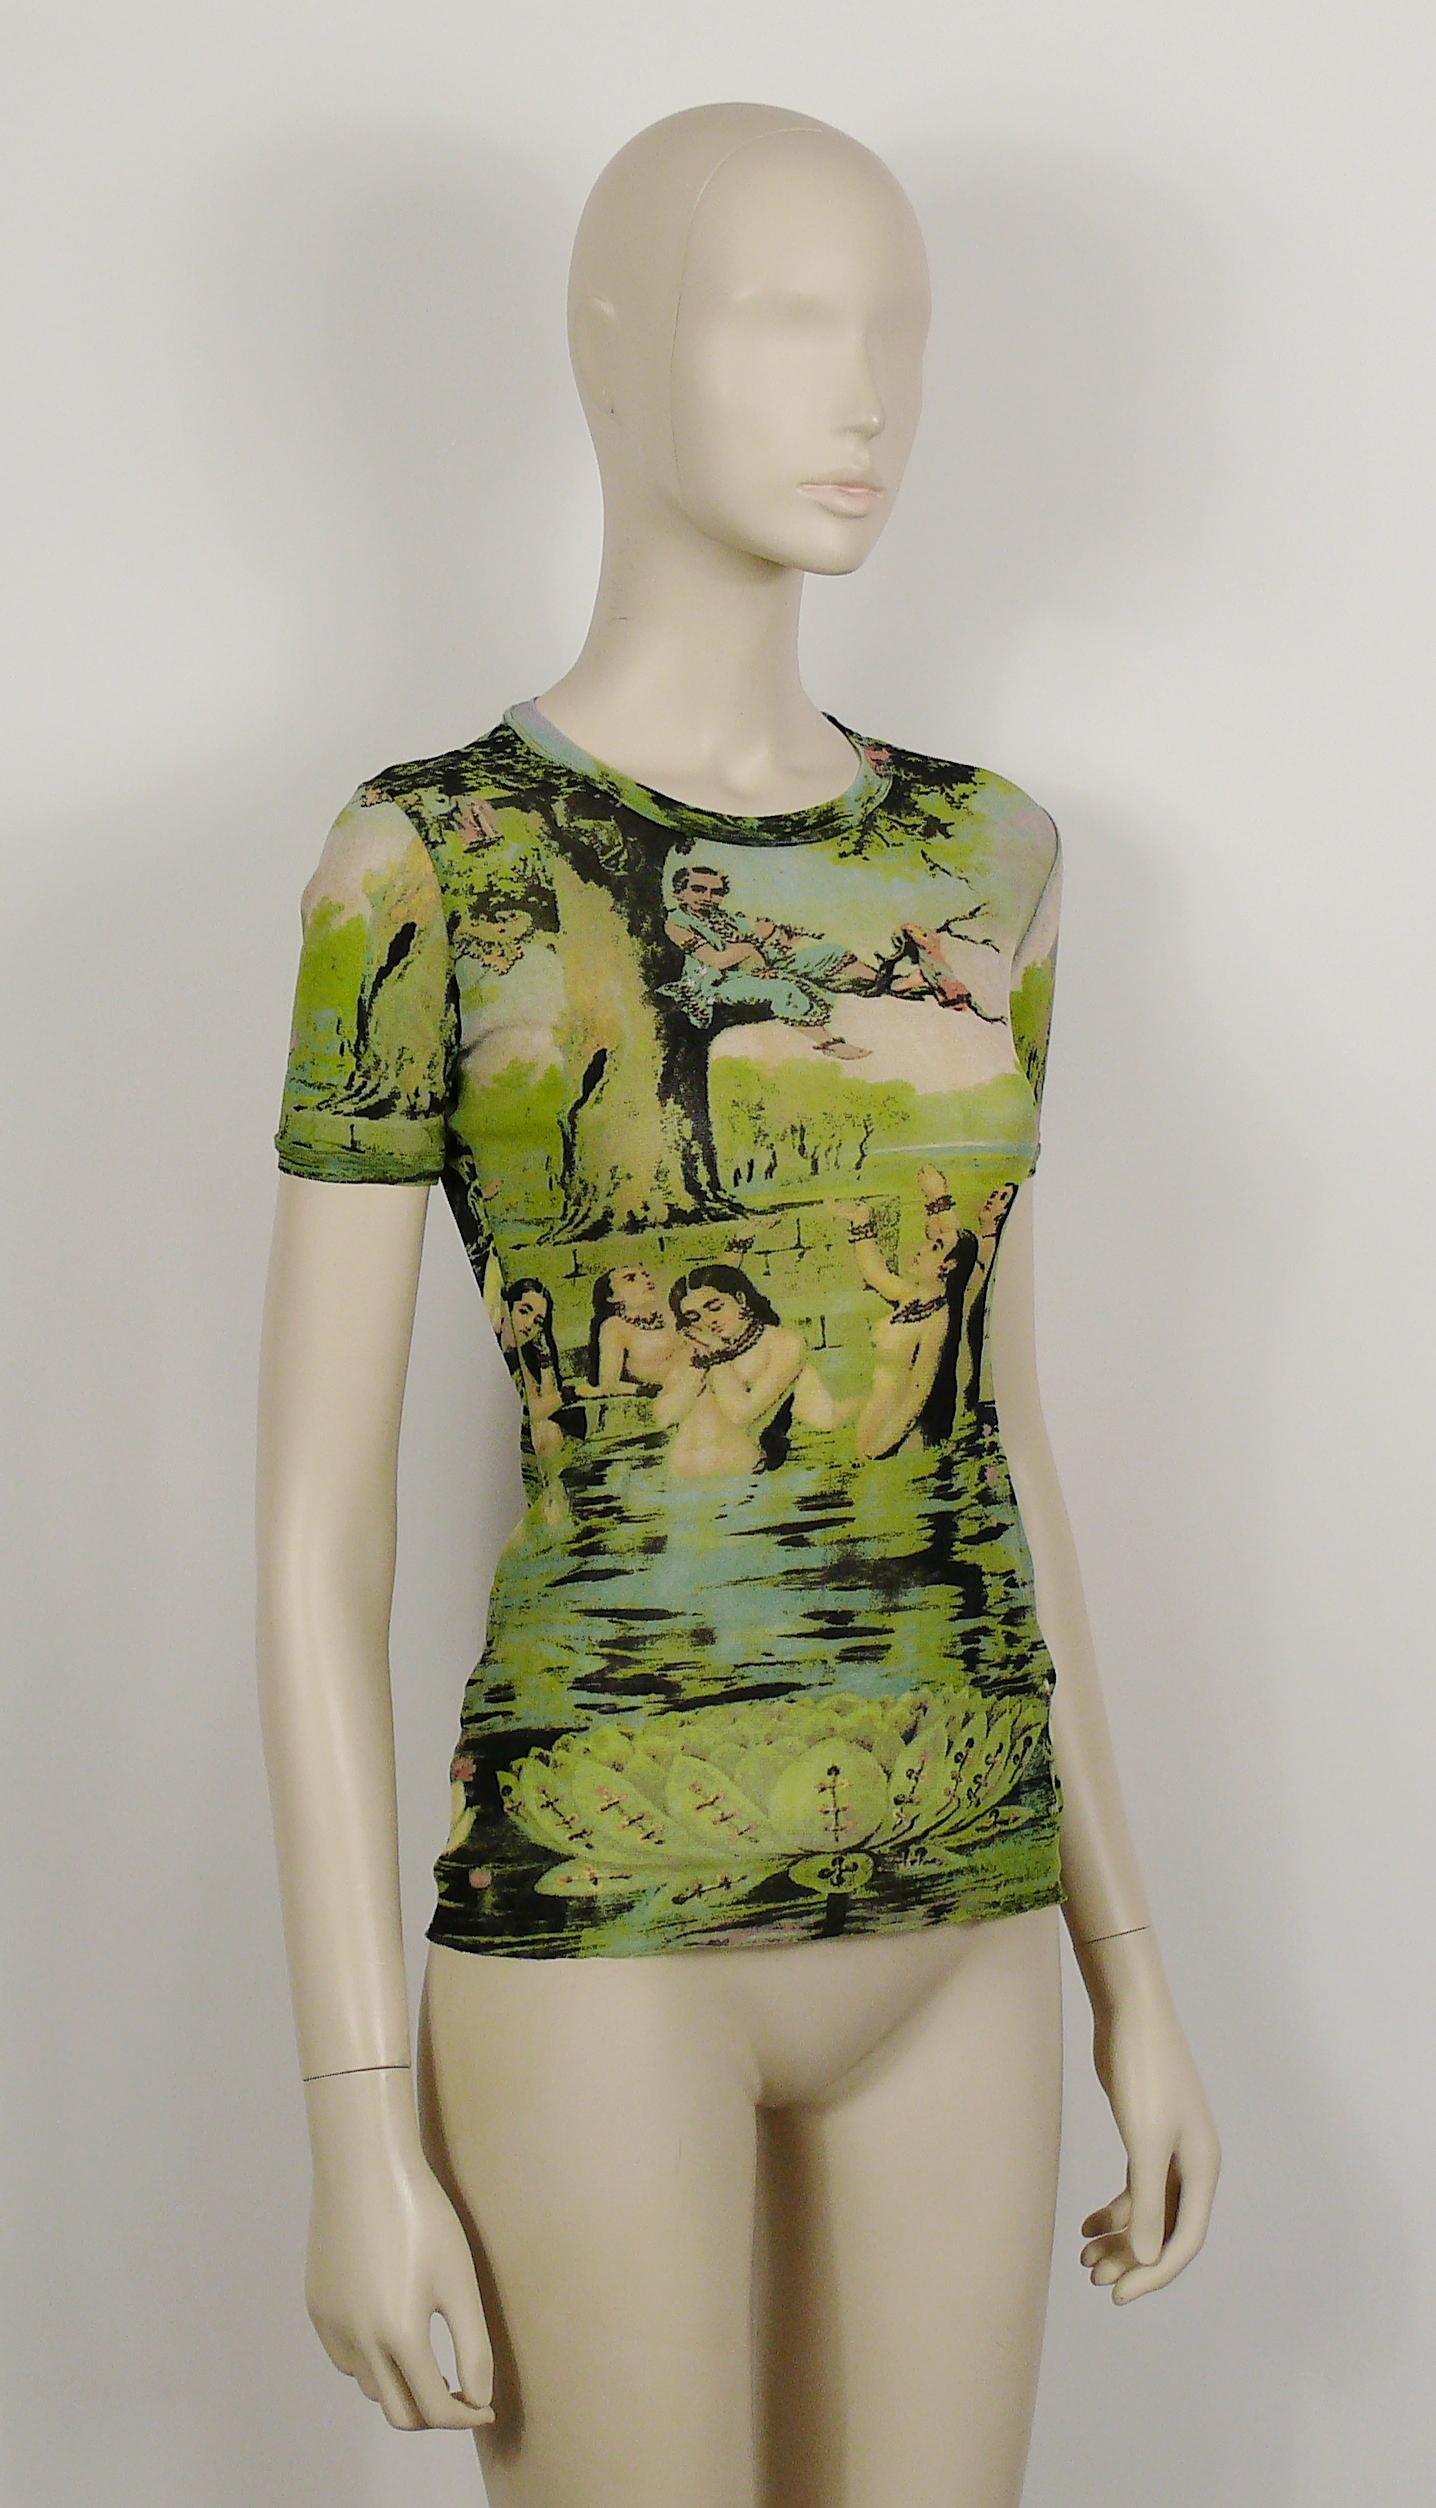 JEAN PAUL GAULTIER vintage sheer FUZZI mesh sleeveless t-shirt featuring a gorgeous Oriental Bath scene print.

Label reads JEAN PAUL GAULTIER MAILLE Made in Italy.

Size tag reads : M.
Please refer to measurements.

Composition tag reads : 100%